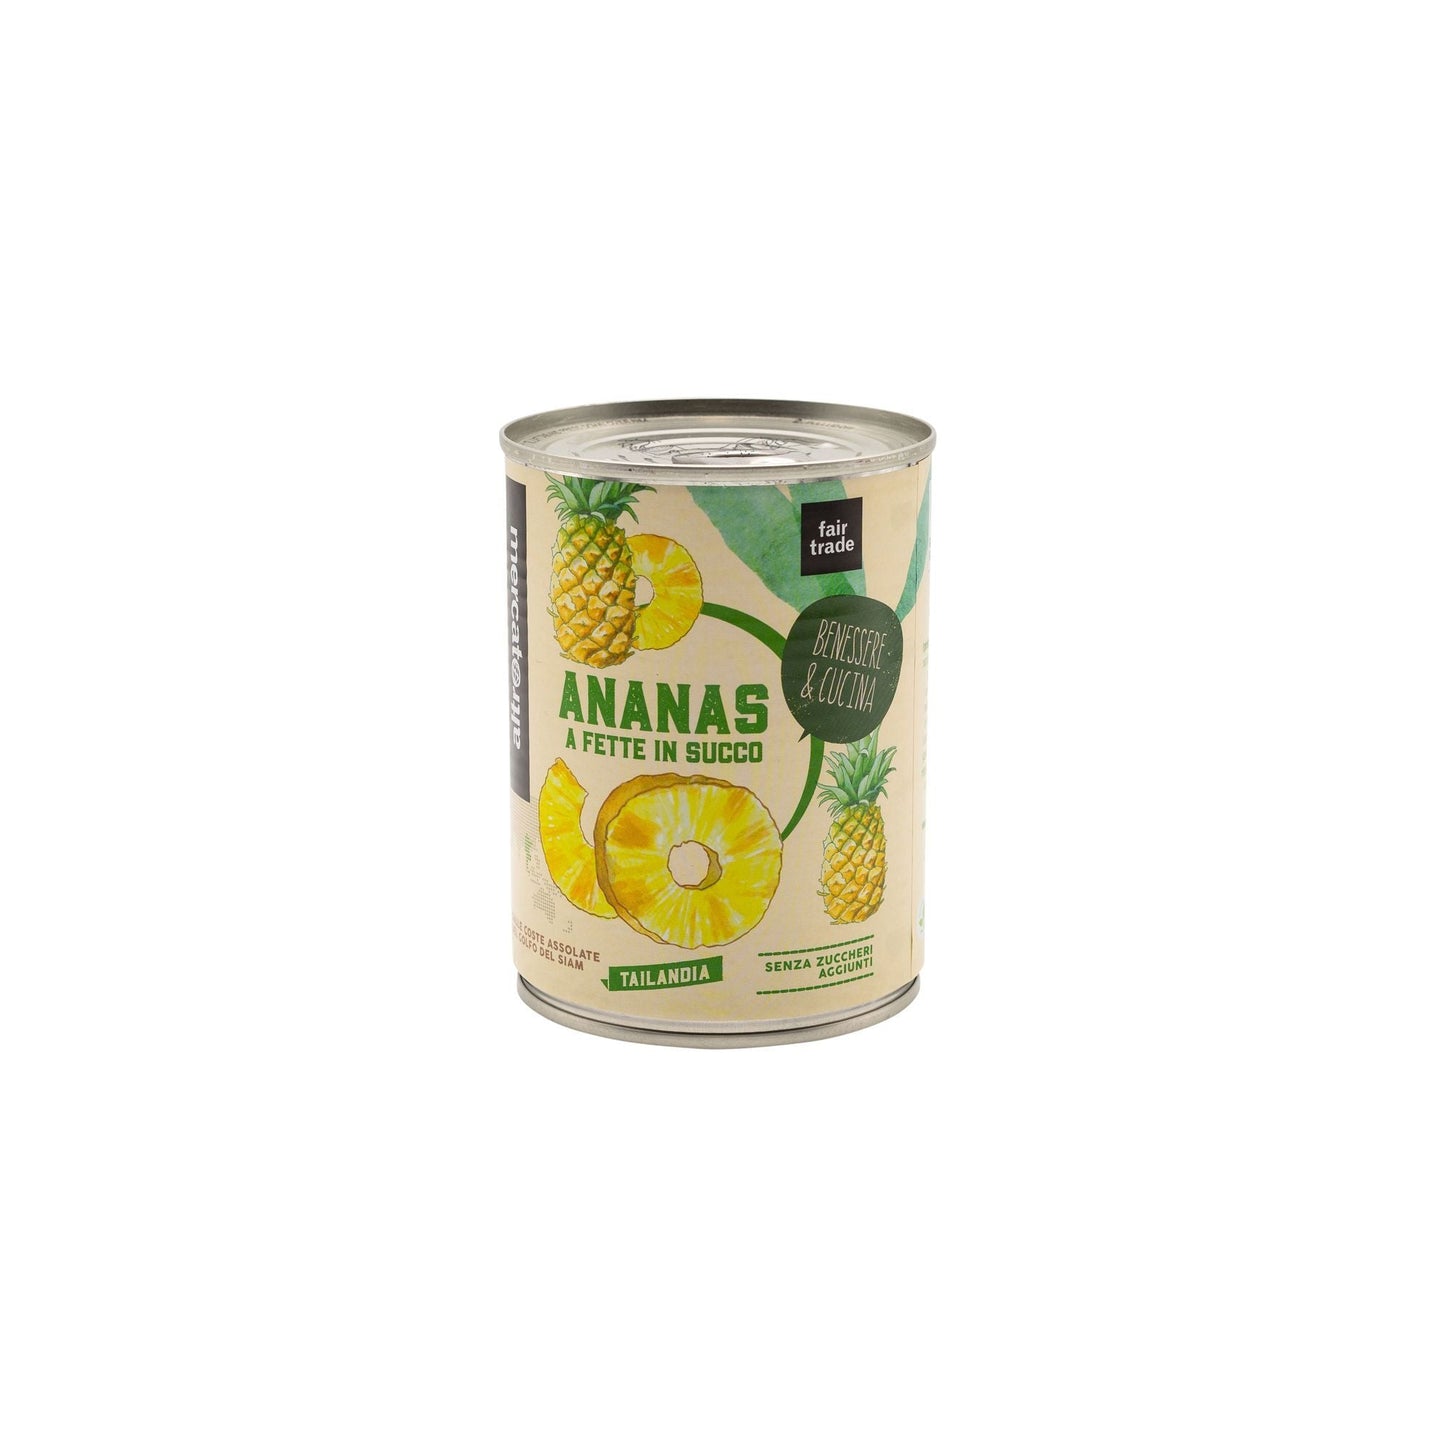 Ananas a fette in succo | 560 g